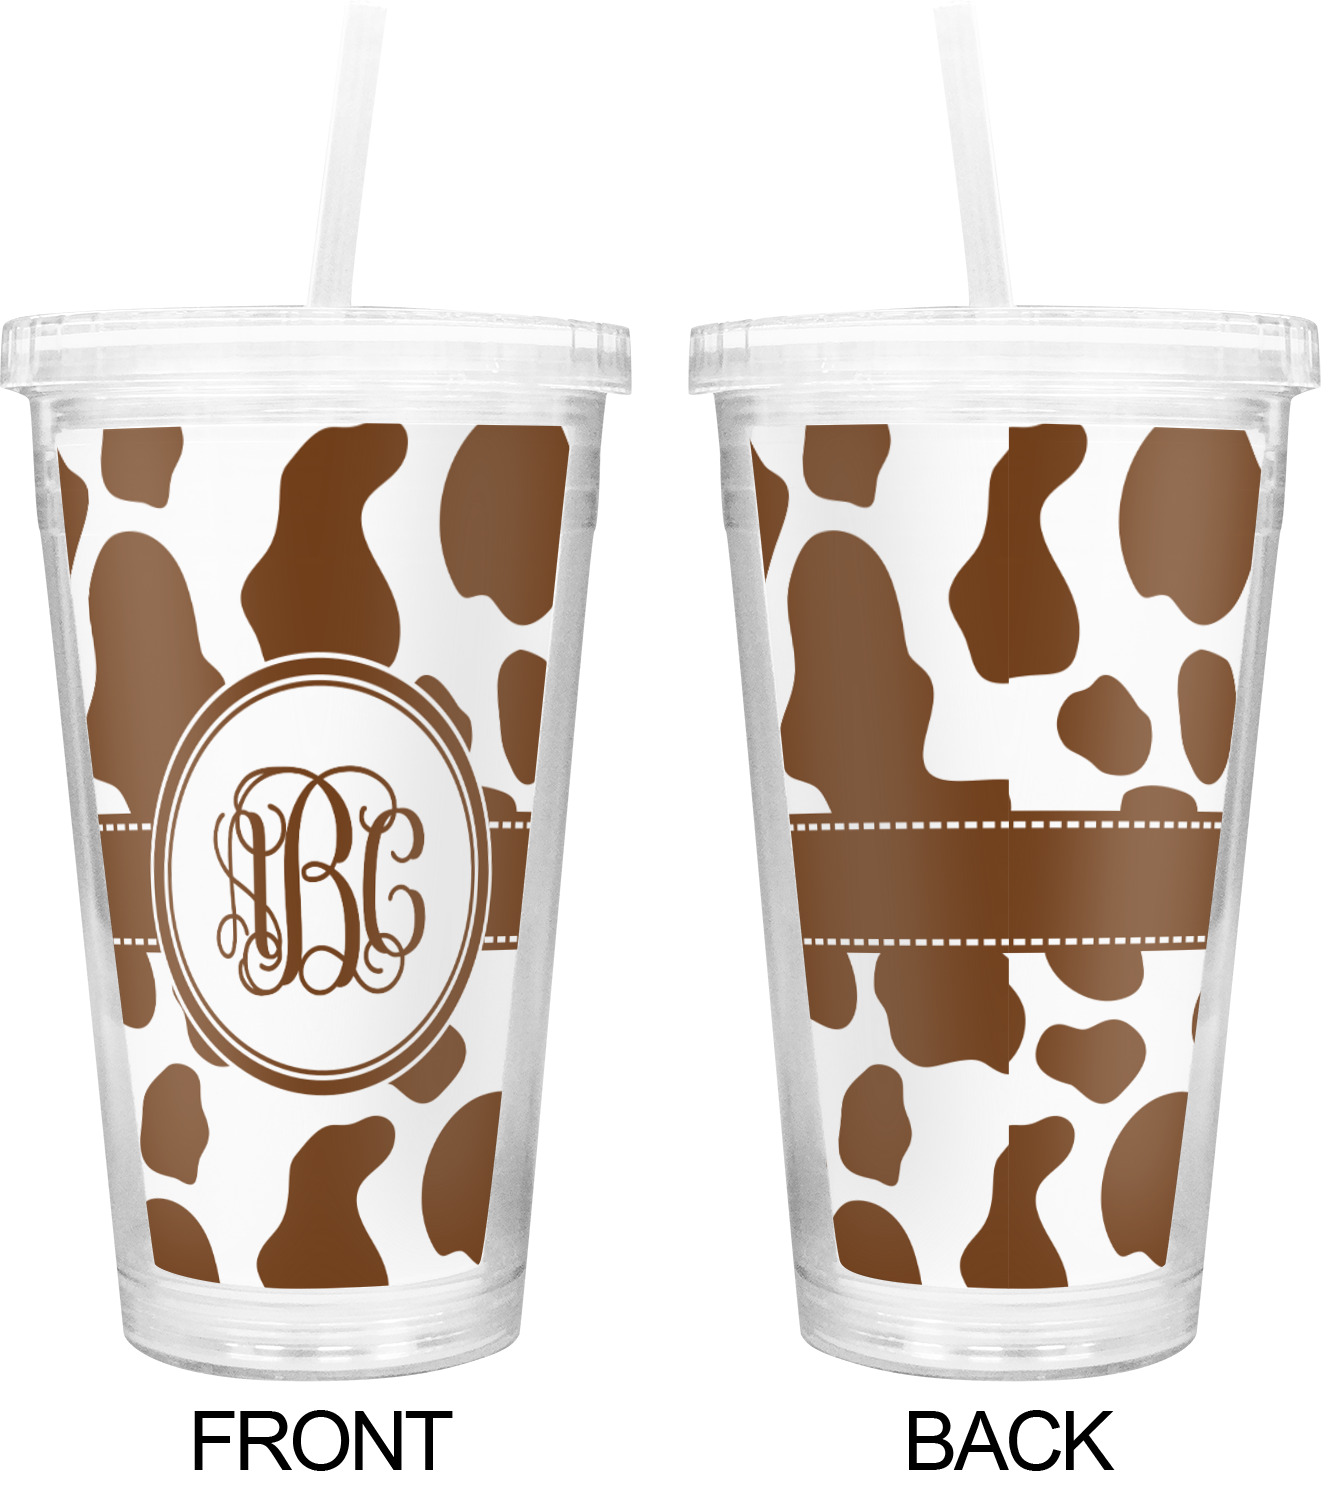 https://www.youcustomizeit.com/common/MAKE/74569/Cow-Print-Double-Wall-Tumbler-with-Straw-Approval.jpg?lm=1671189787